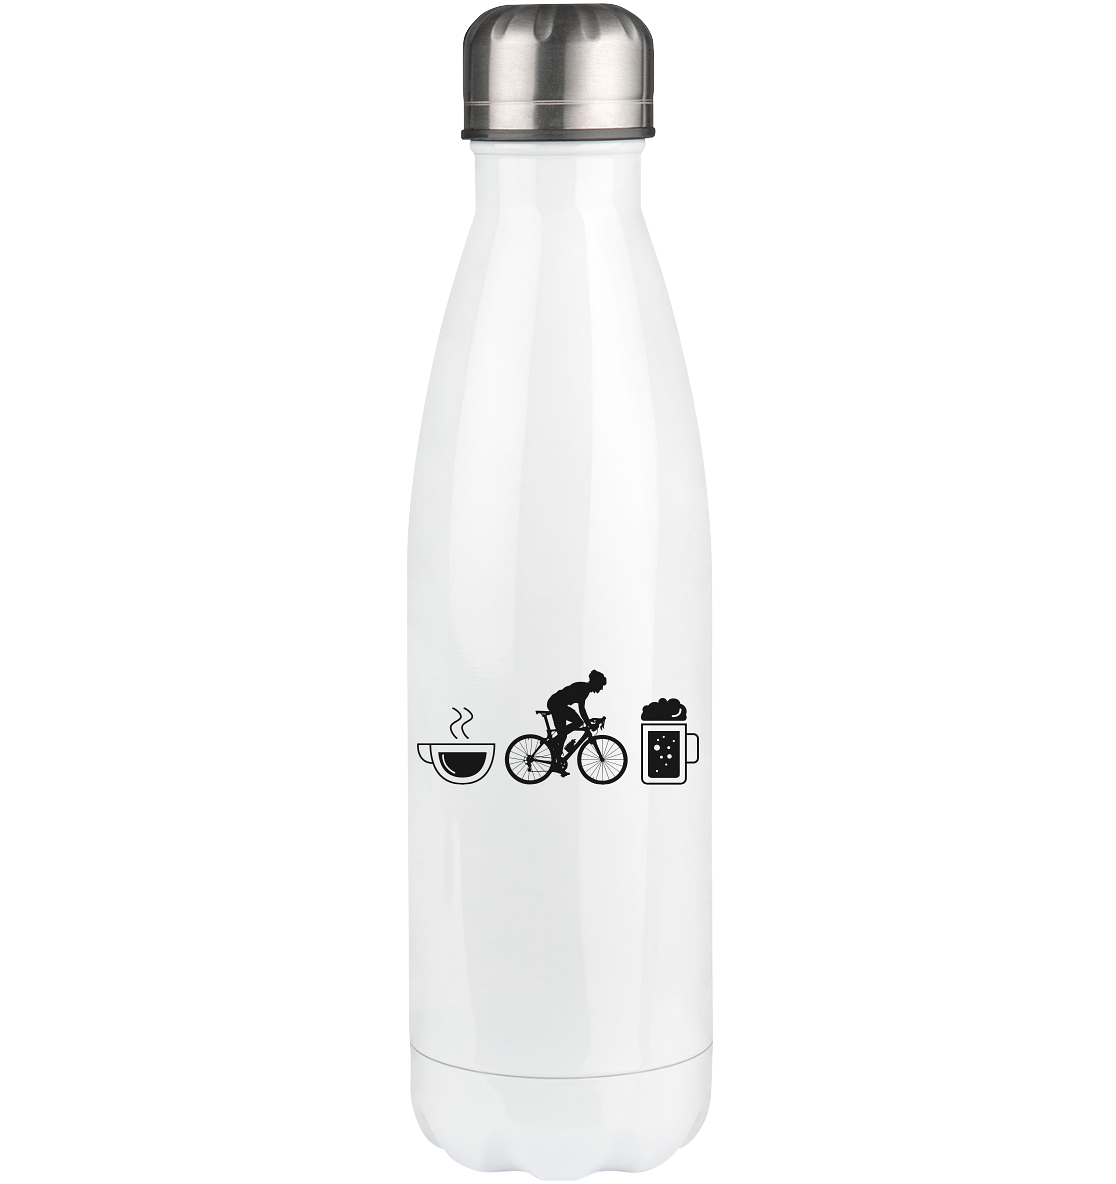 Coffee Beer and Cycling - Edelstahl Thermosflasche fahrrad 500ml